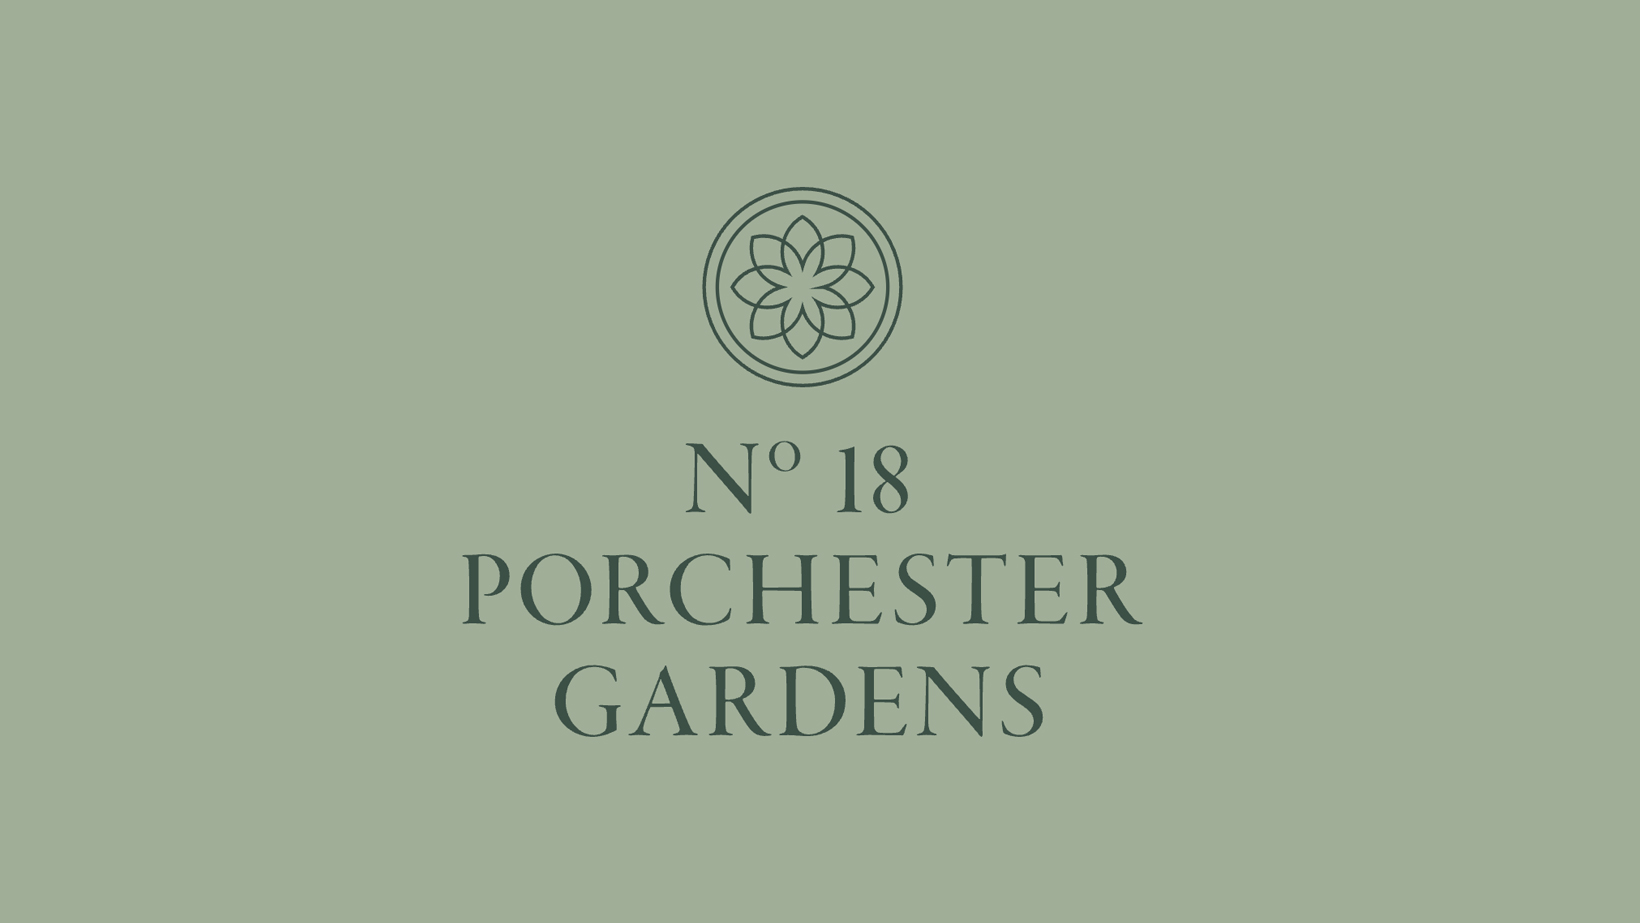 Just launched: No. 18 Porchester Gardens